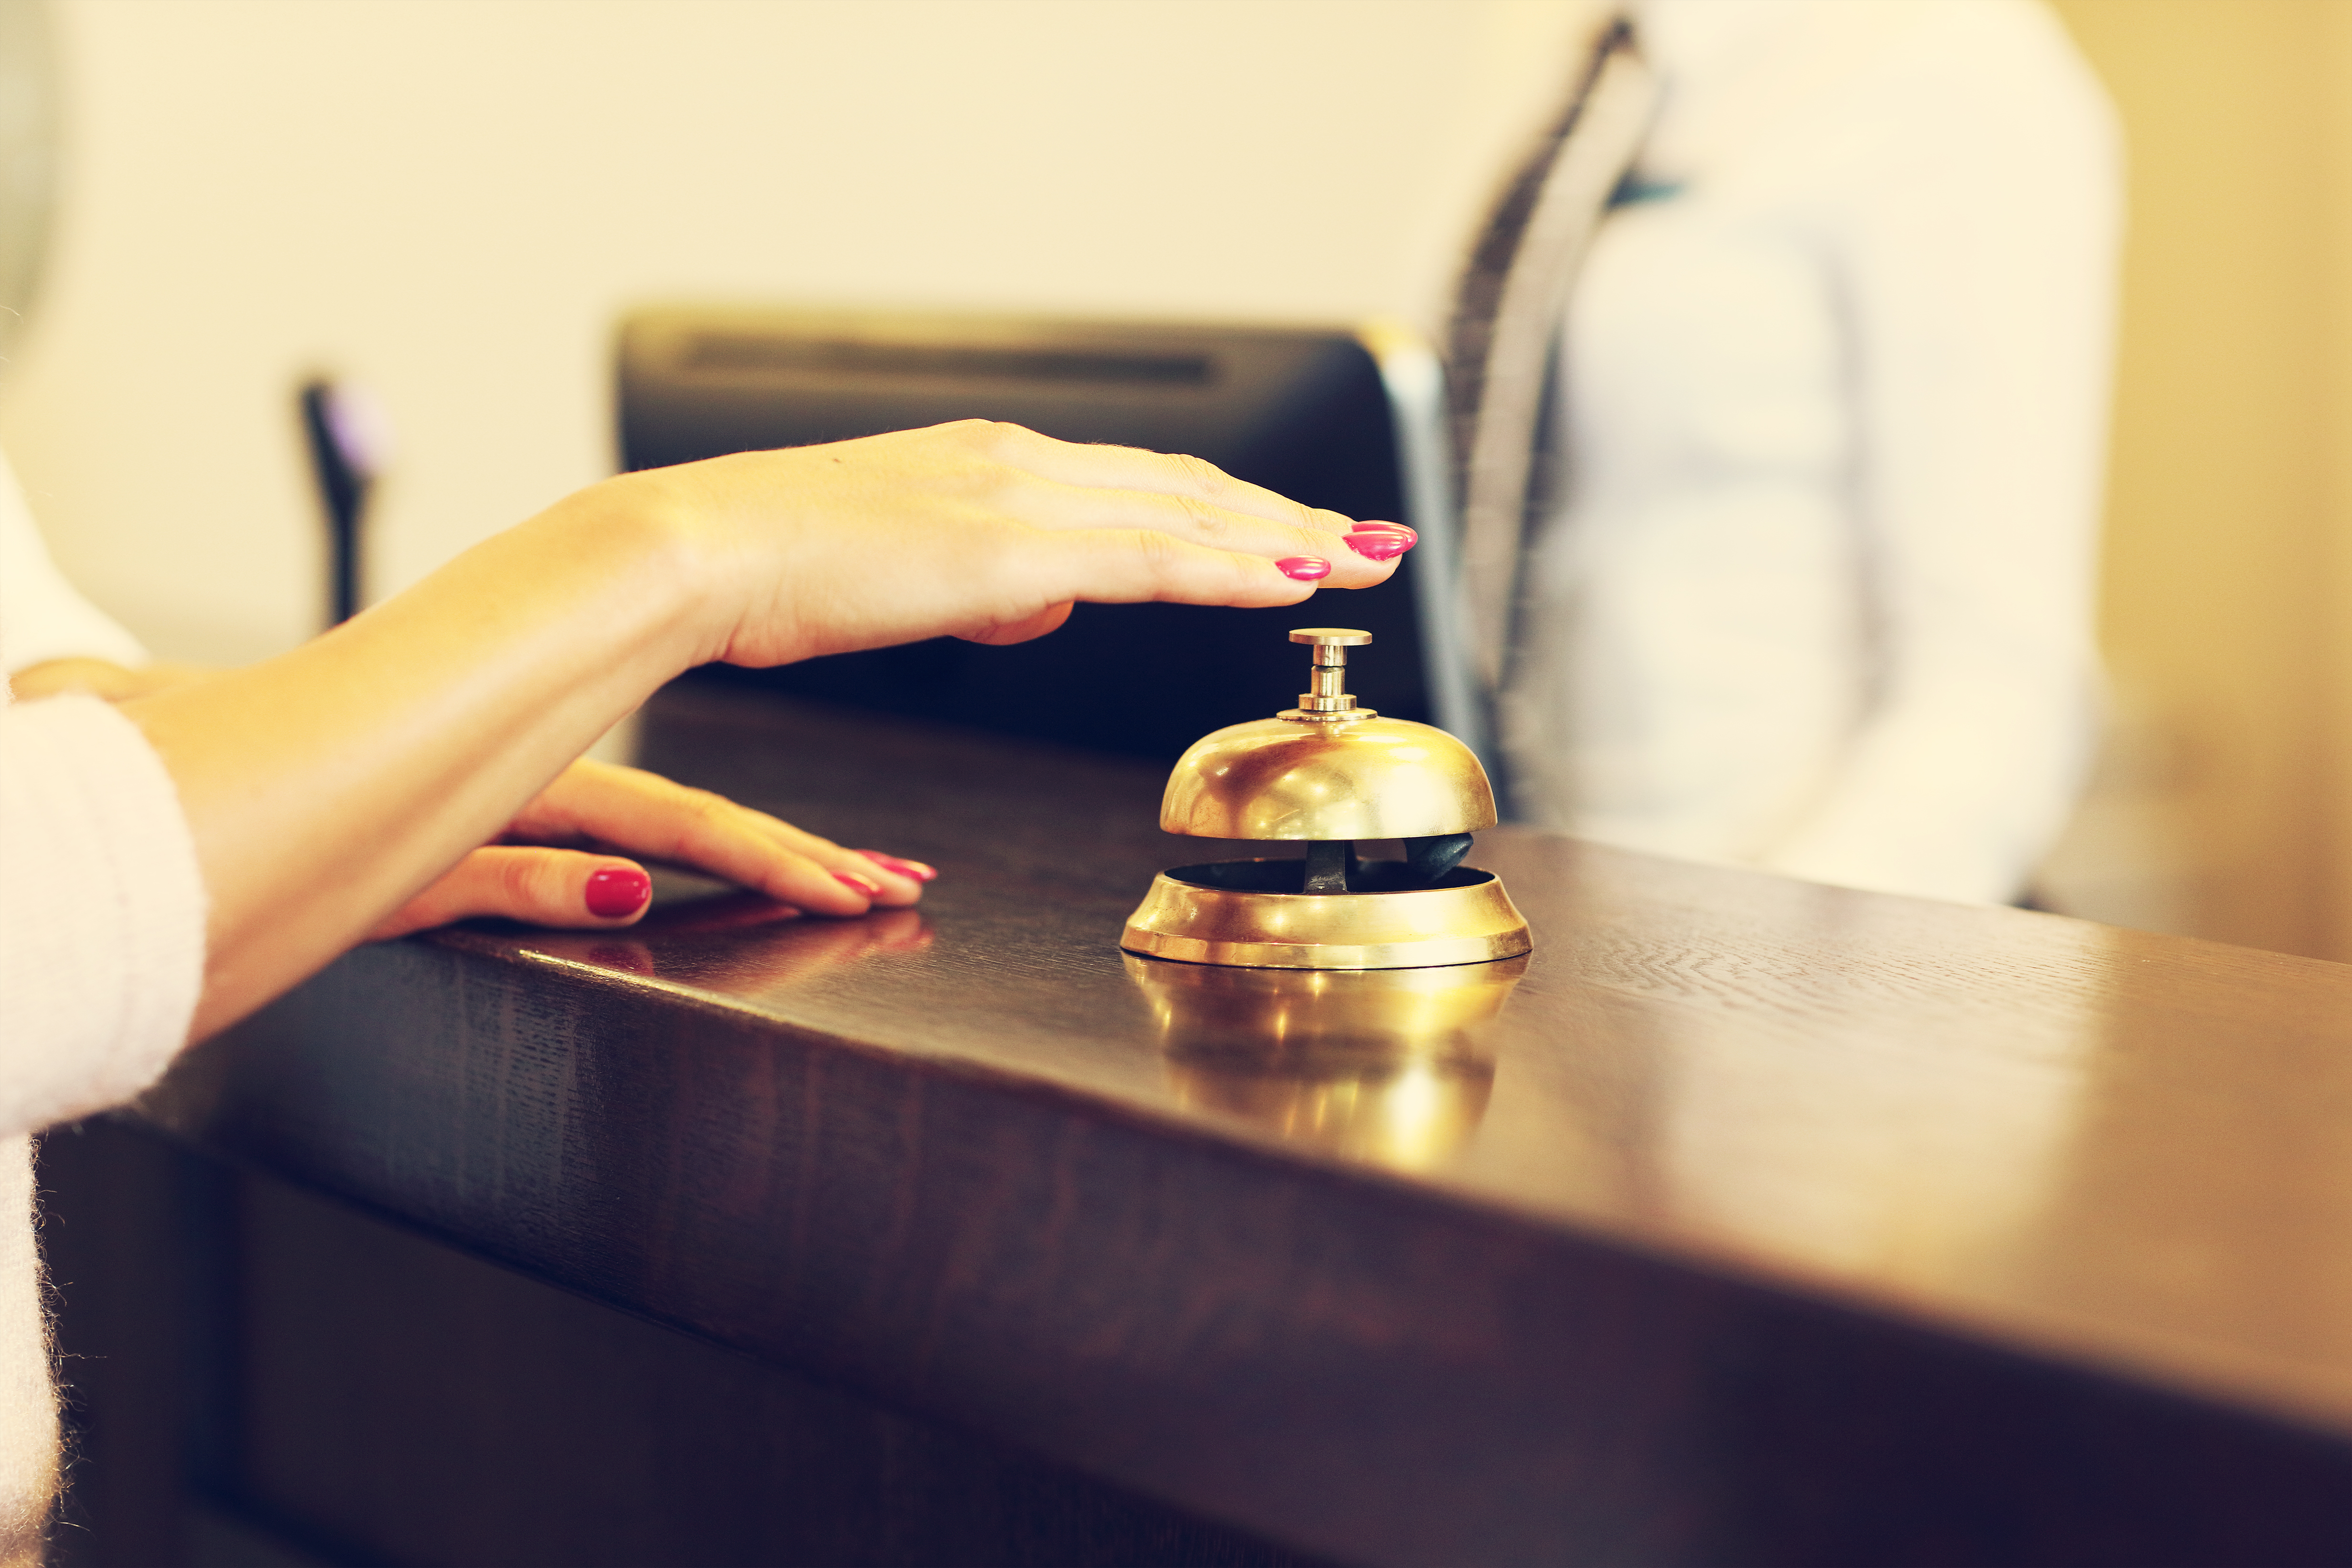 A woman ringing a bell at a hotel reception desk | Source: Shutterstock